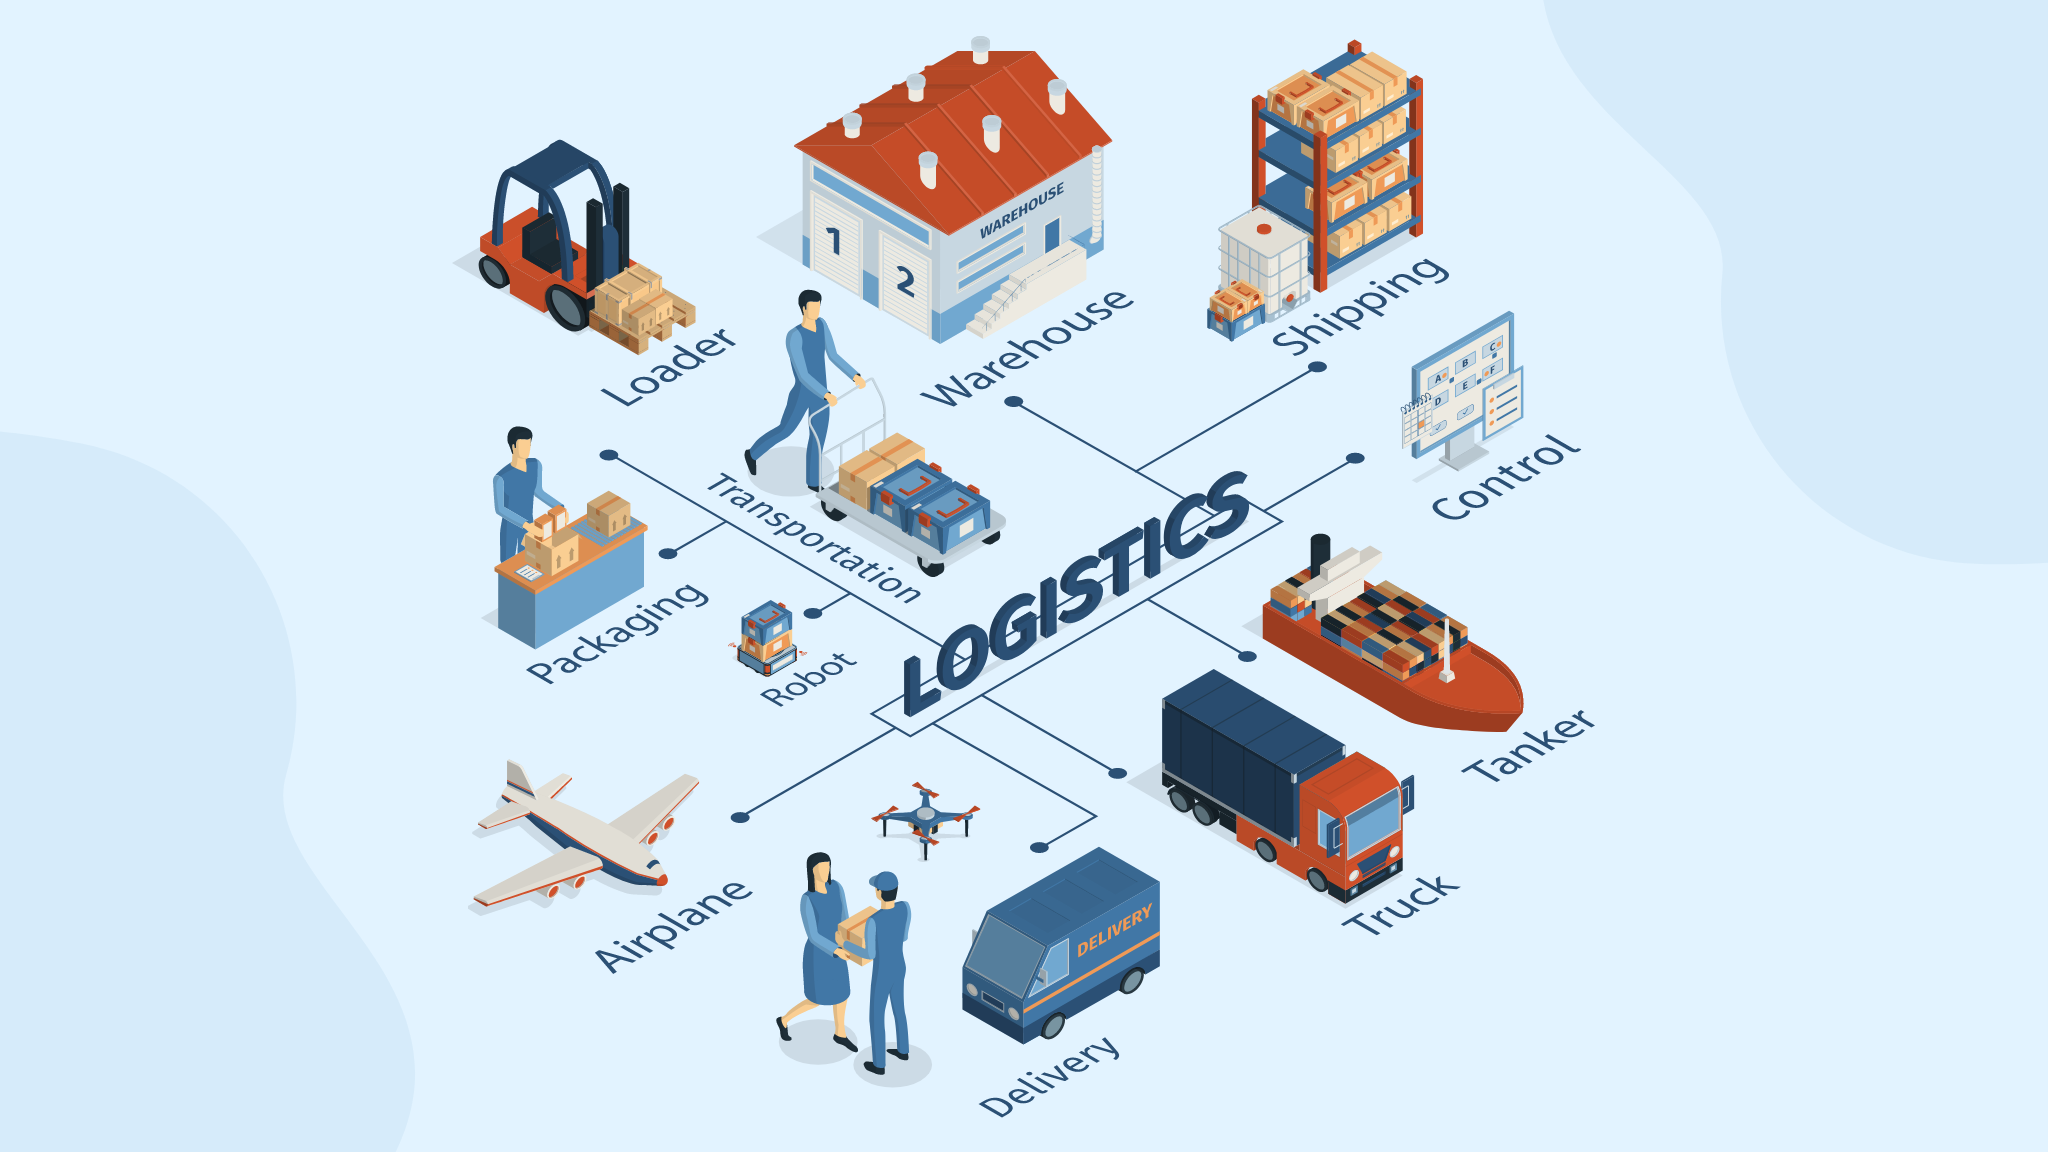 7 Must-Haves to Consider While Developing Apps for Logistics